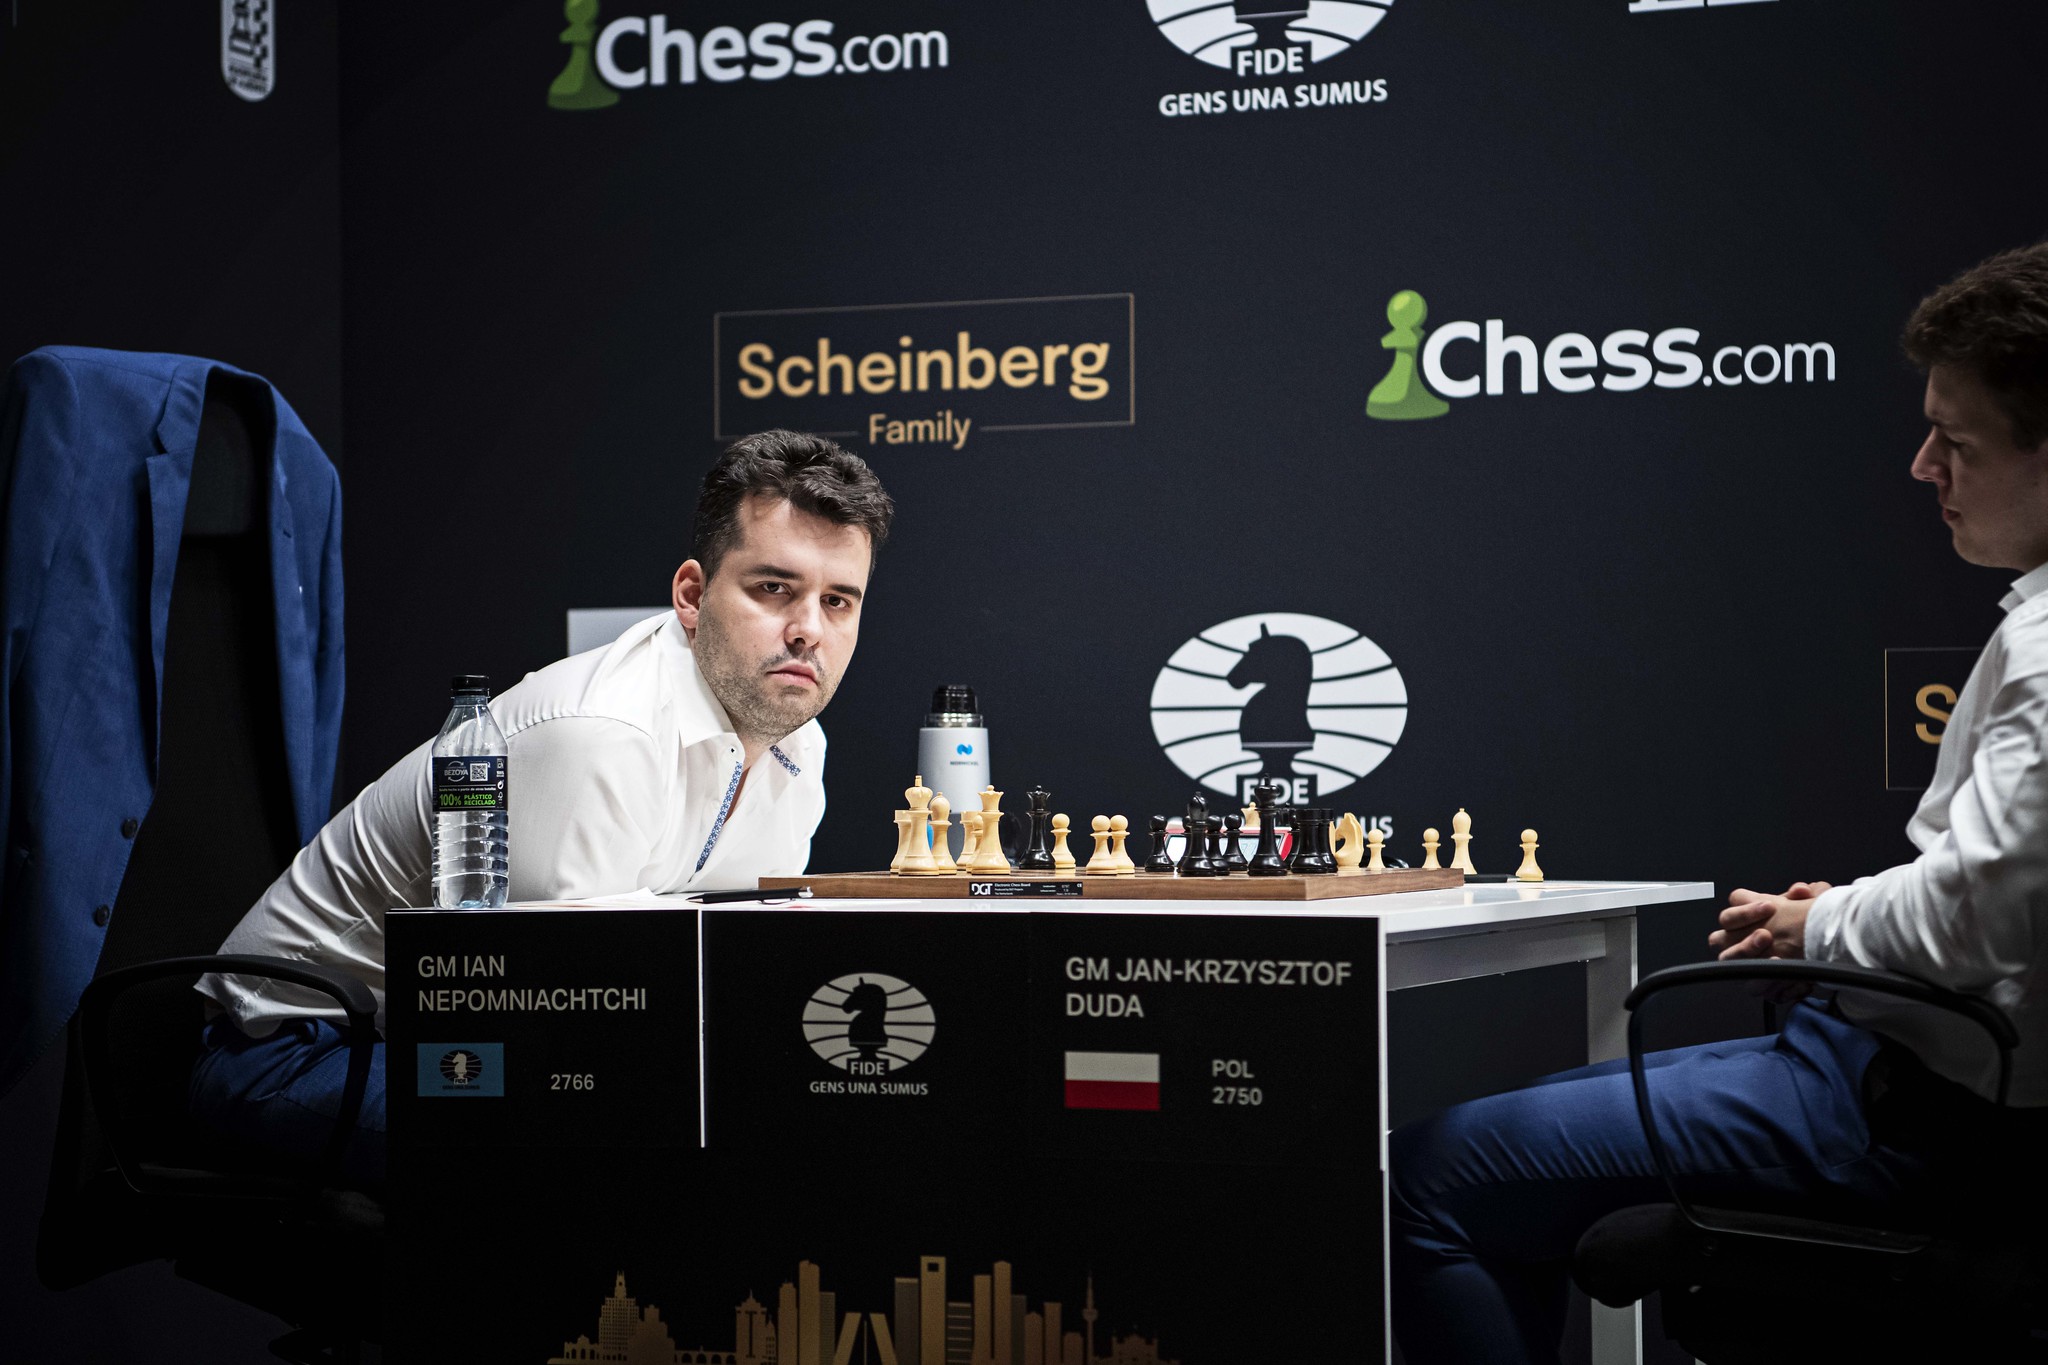 Nepo and Caruana Win in Sixth Round of Candidates